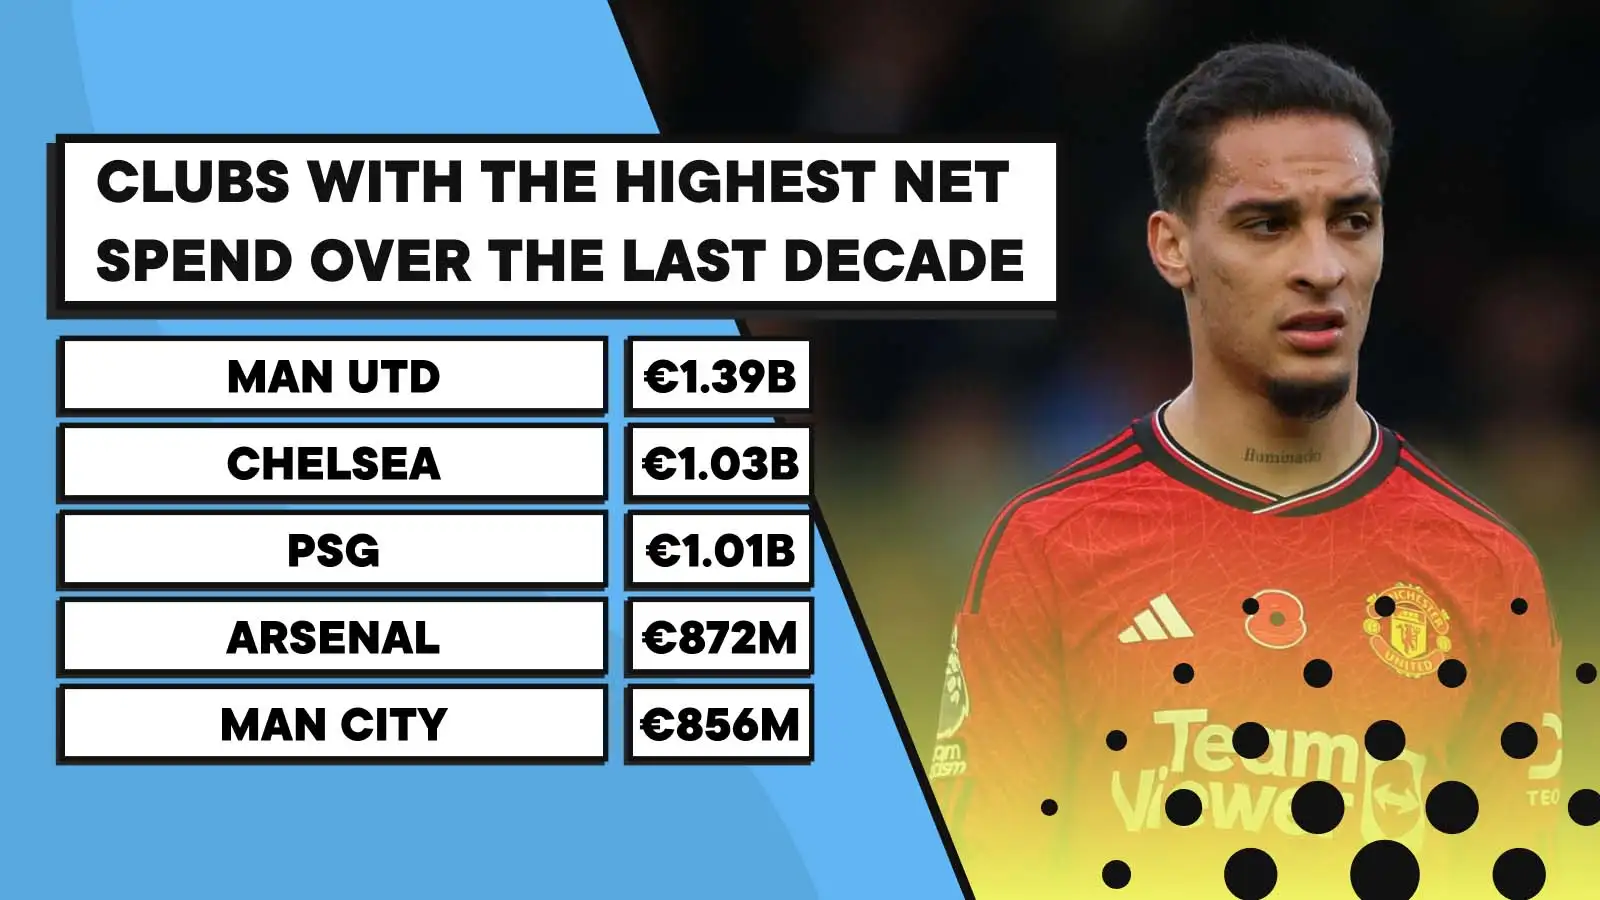 The 10 clubs with the highest net spend over the past decade: Man Utd, Chelsea, PSG....